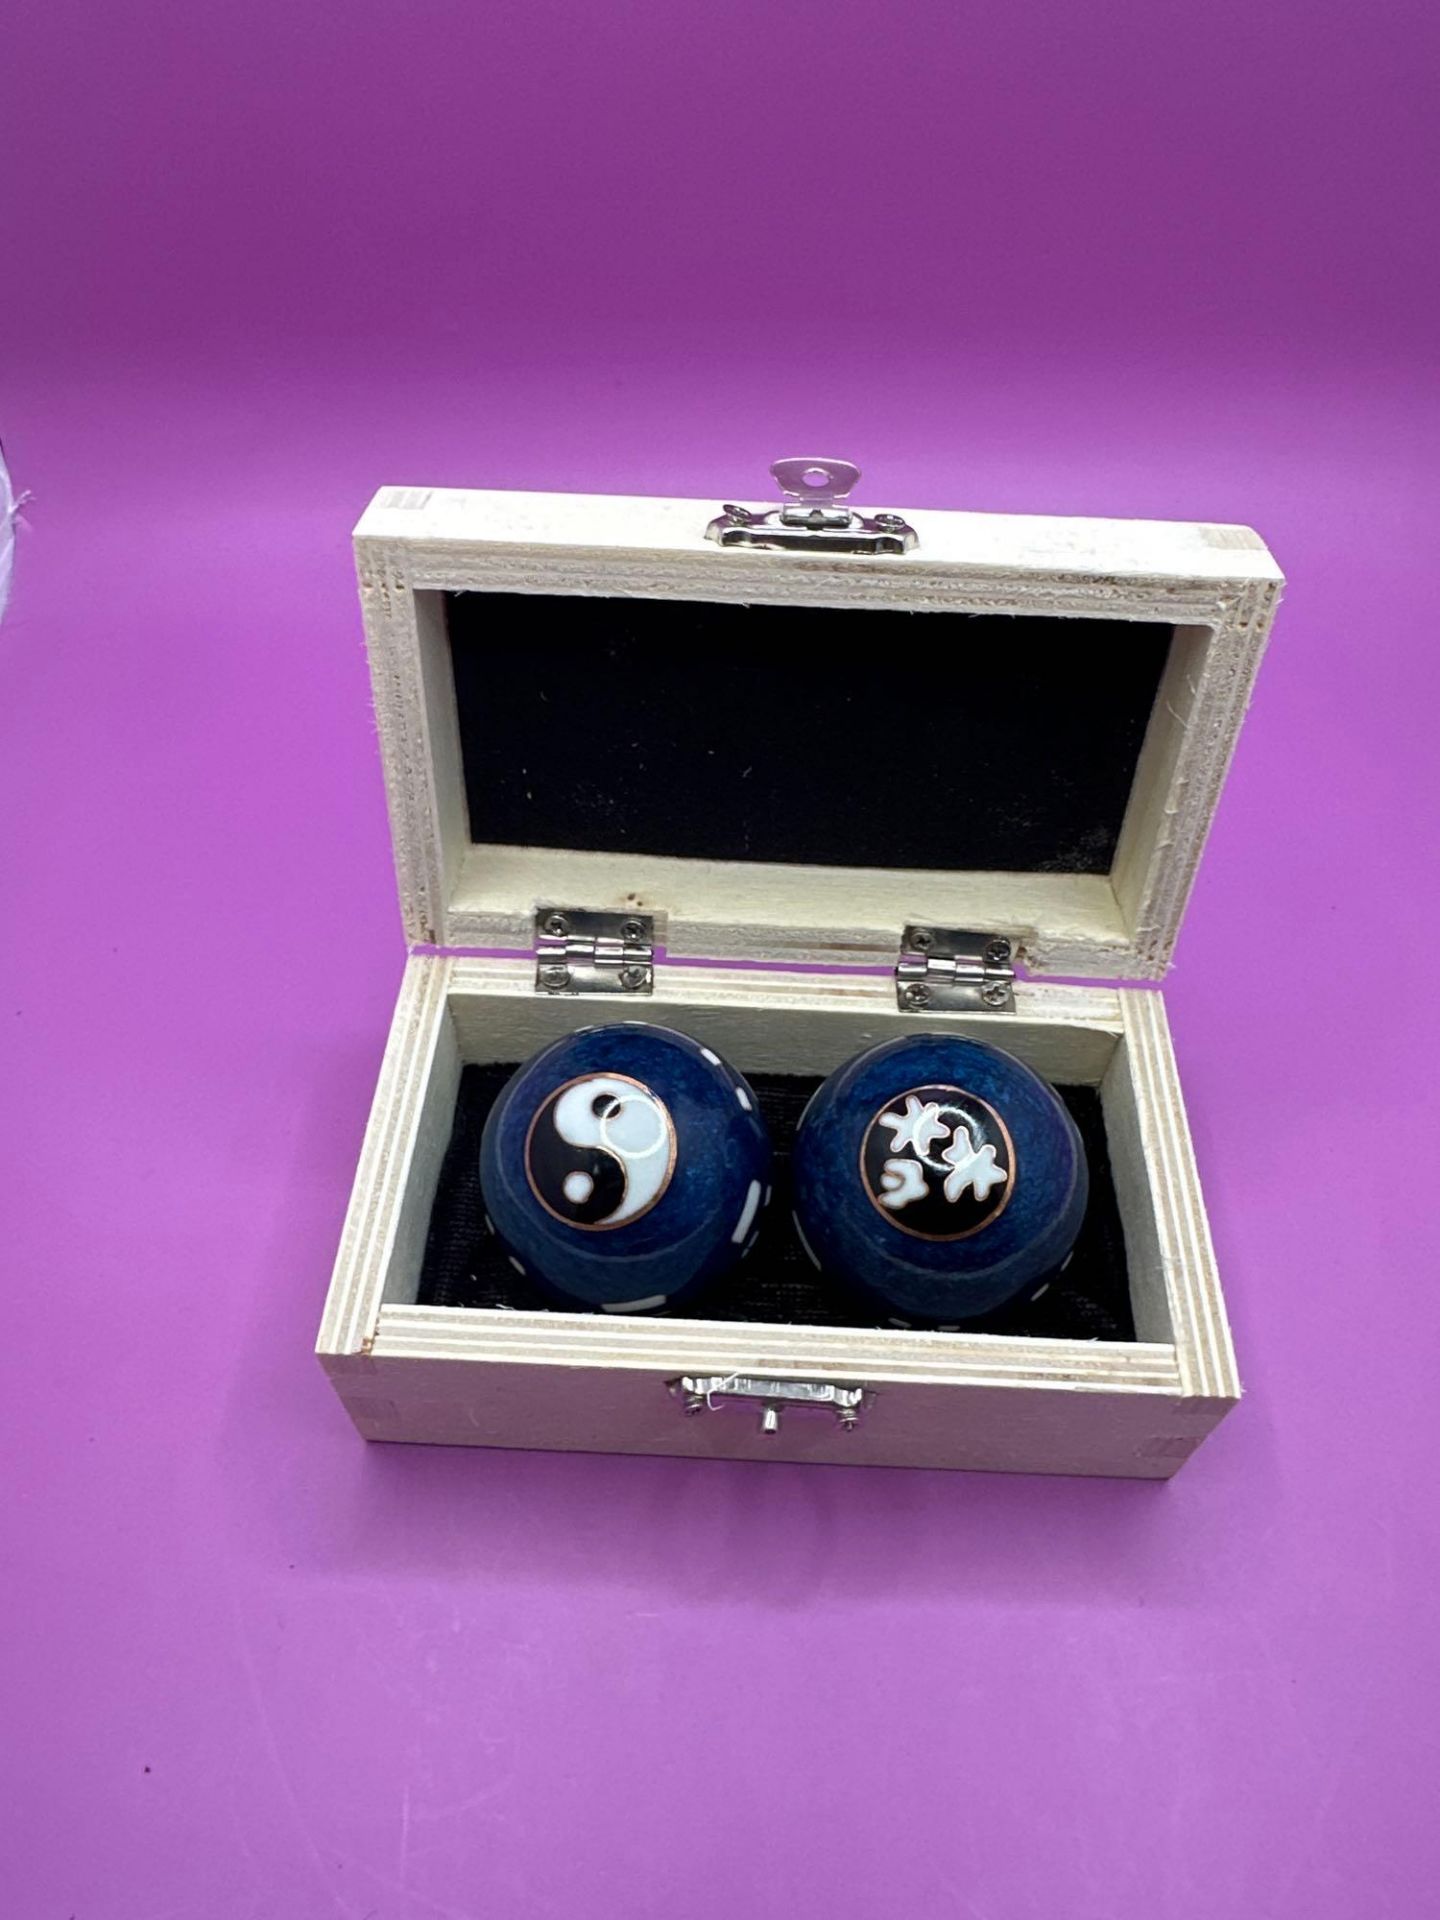 Chiming Harmony Exercise Massage Therapy Balls (Yin Yang) In Wooden Box - Bild 4 aus 4